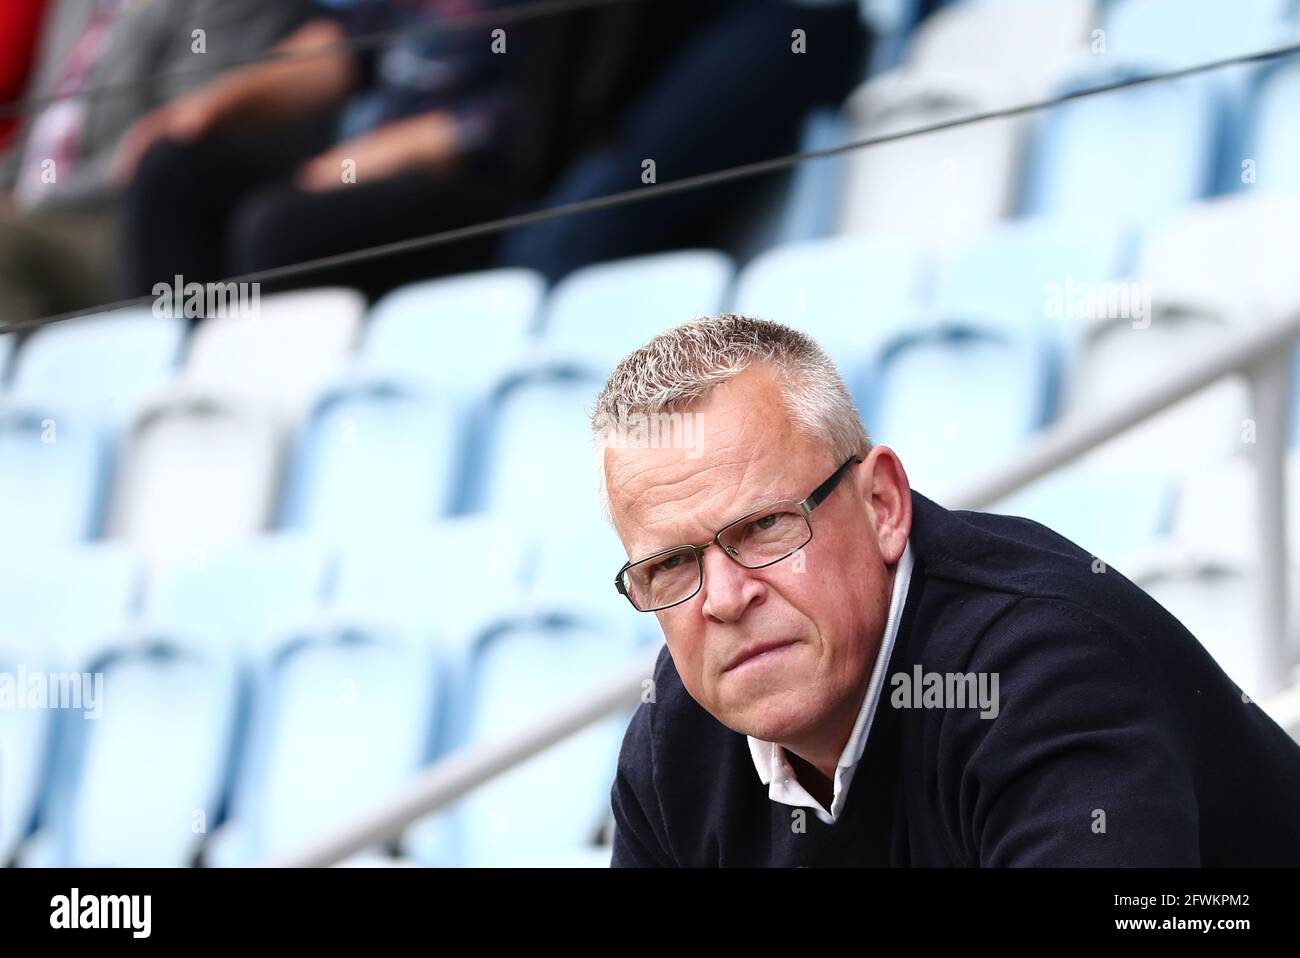 Jan Olof 'Janne' Andersson is a Swedish football coach who manages the Sweden national team. He is also a former player. Stock Photo